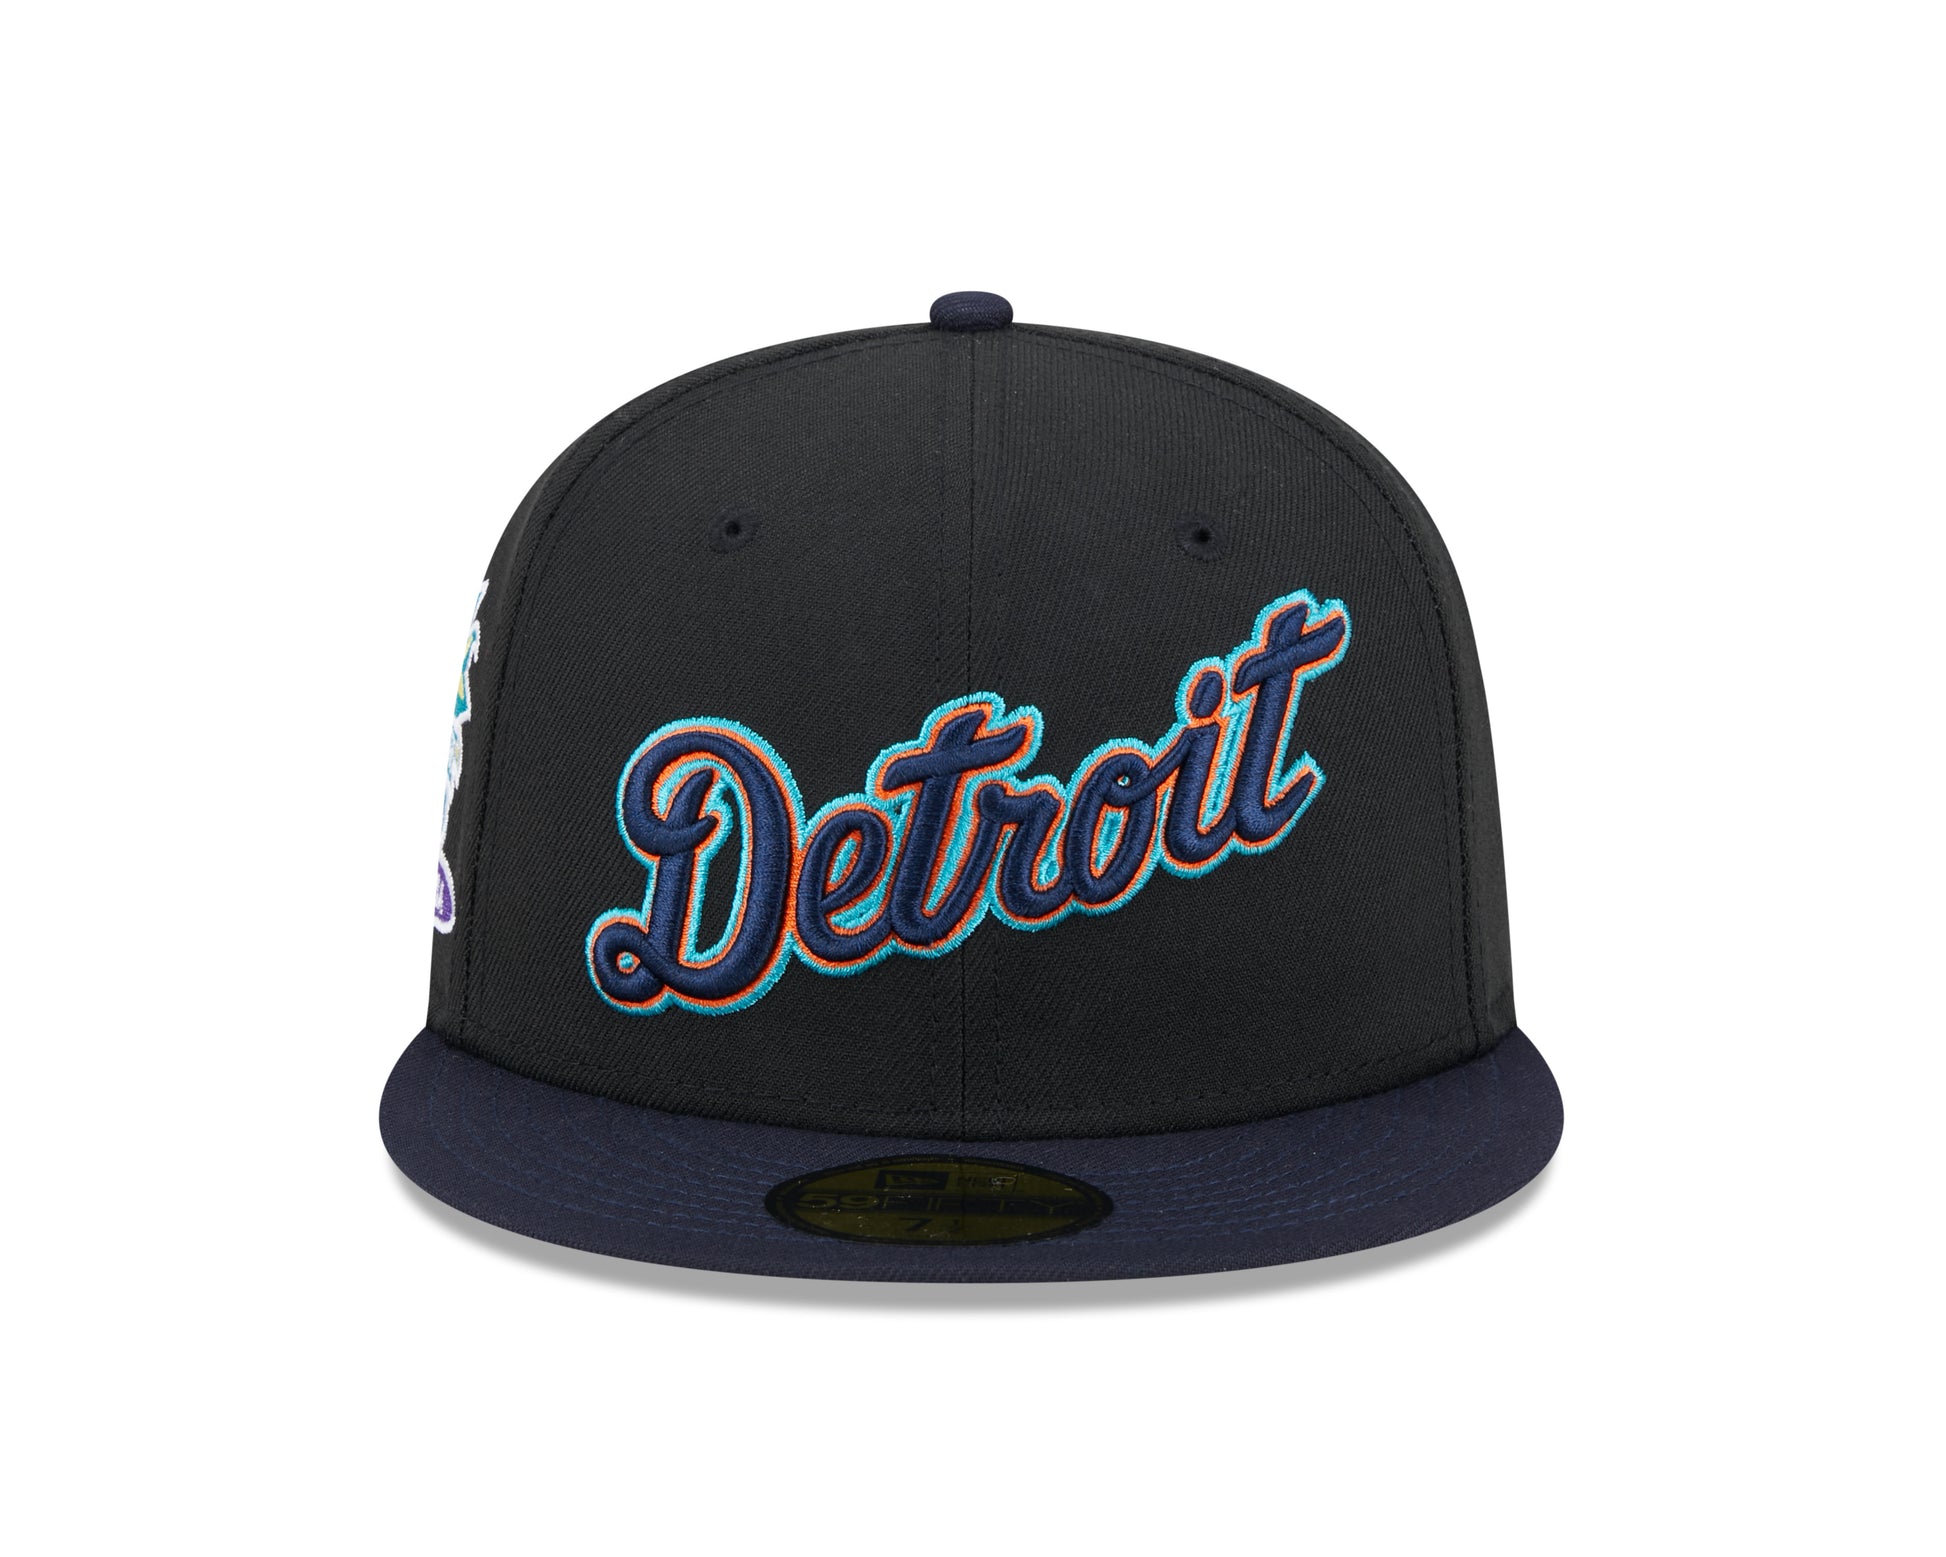 New Era - 59fifty Fitted Cap - Detroit Tigers - RETRO SPRING TRAINING - Black - Headz Up 